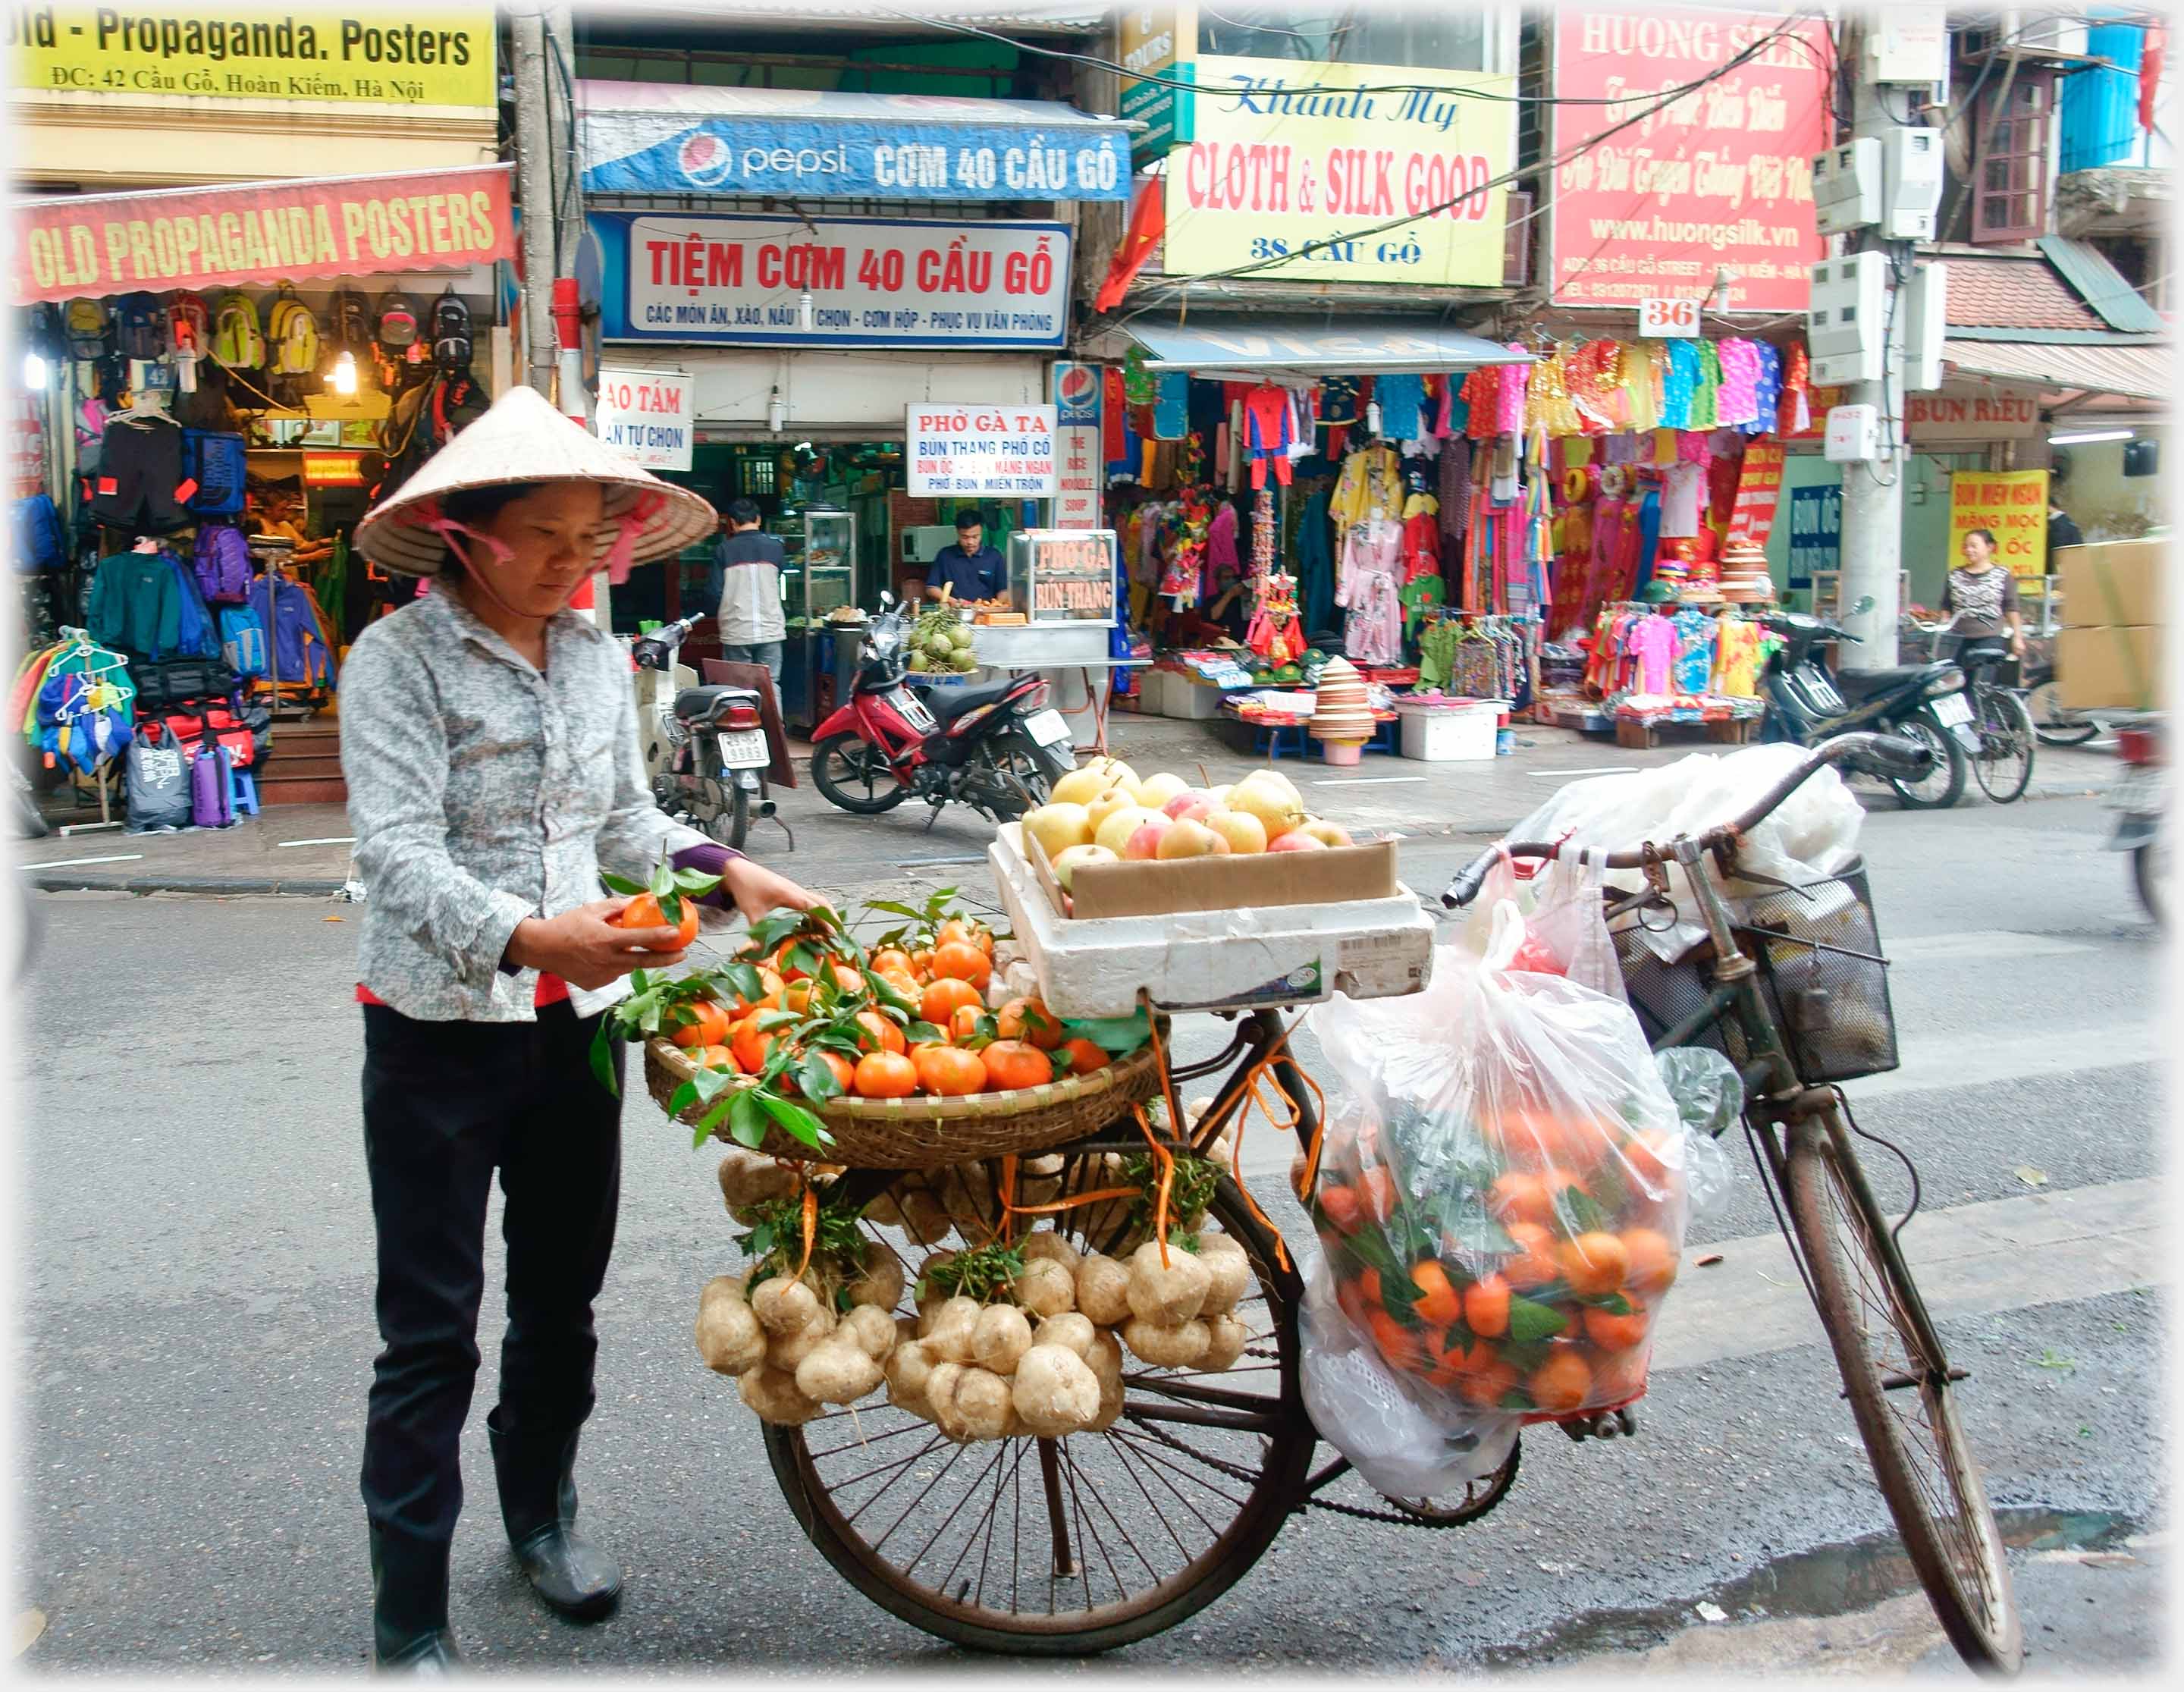 Woman standing beside a bicycle loaded with oranges, apples and vegetables.